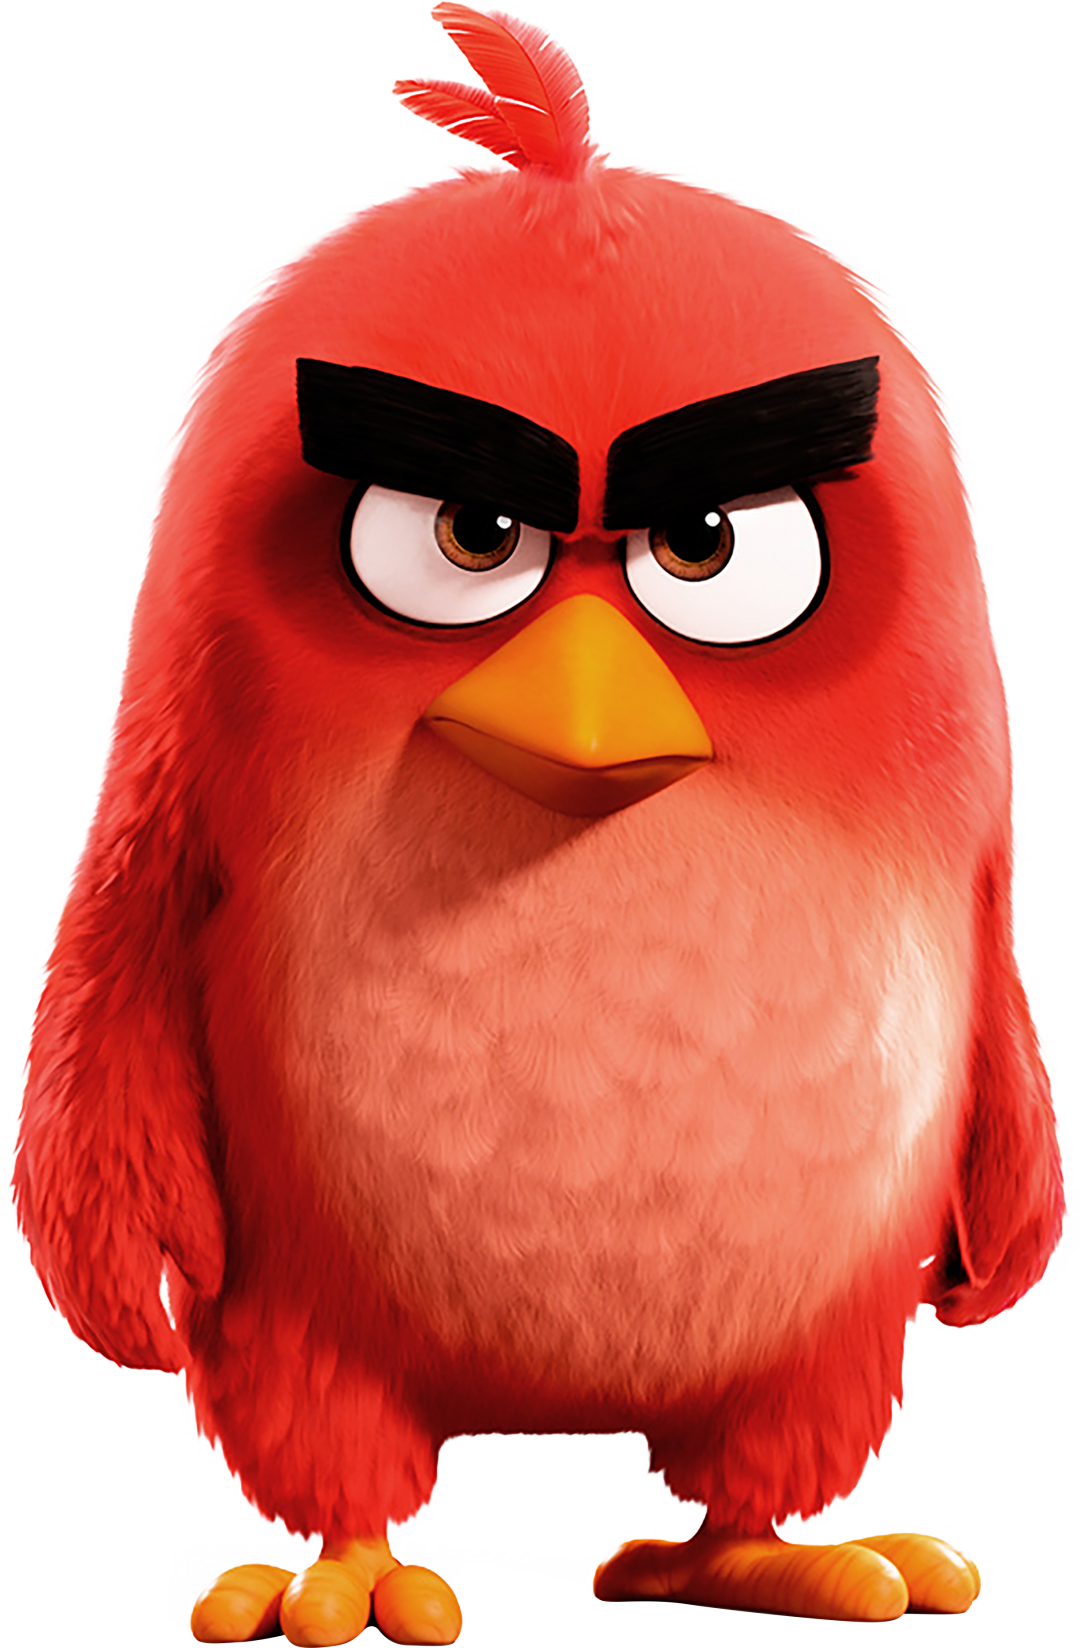 The Angry Birds Movie Angry Birds Pelicula